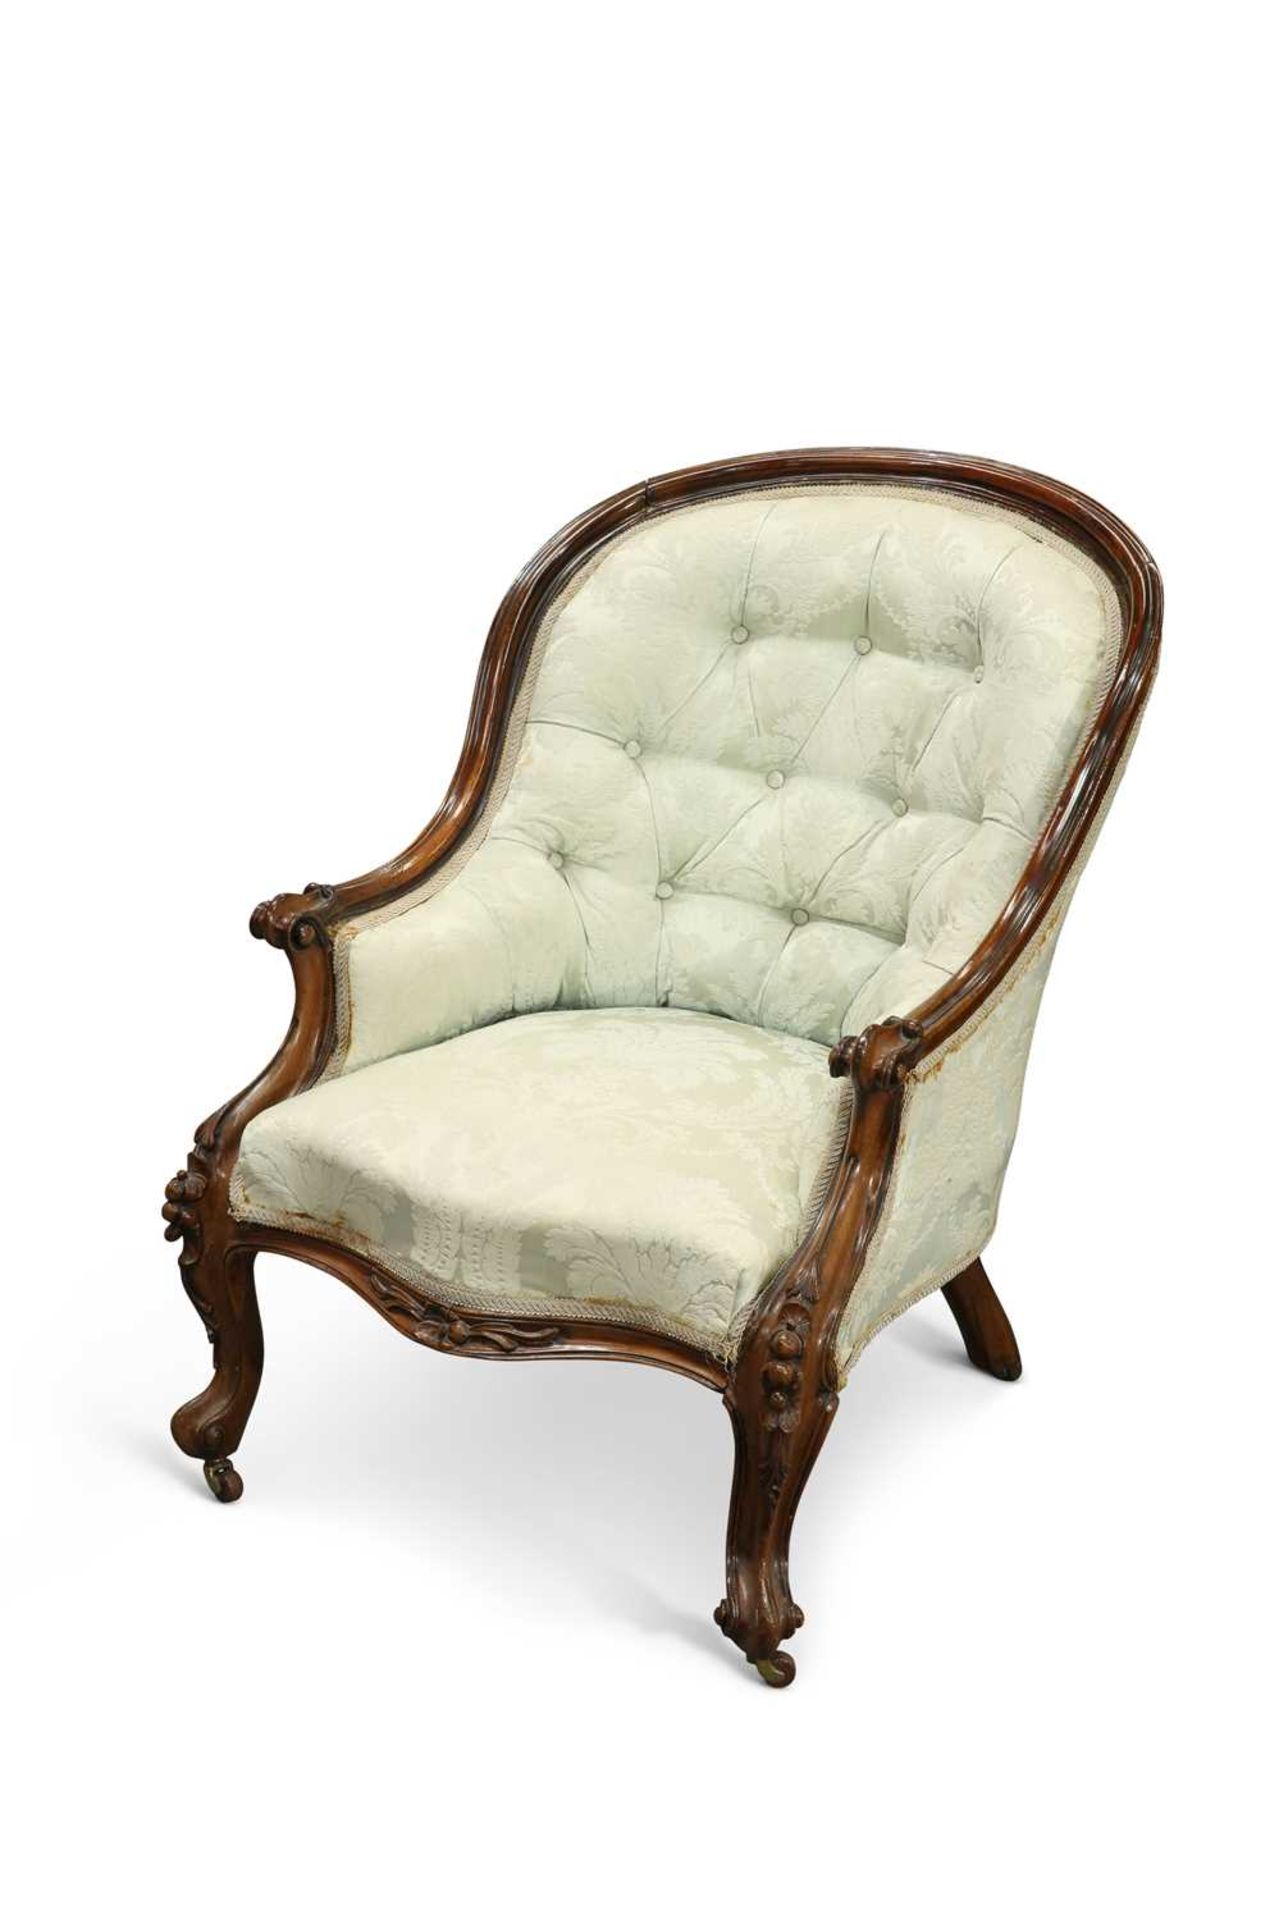 A VICTORIAN ROSEWOOD AND UPHOLSTERED SALON CHAIR, CIRCA 1870